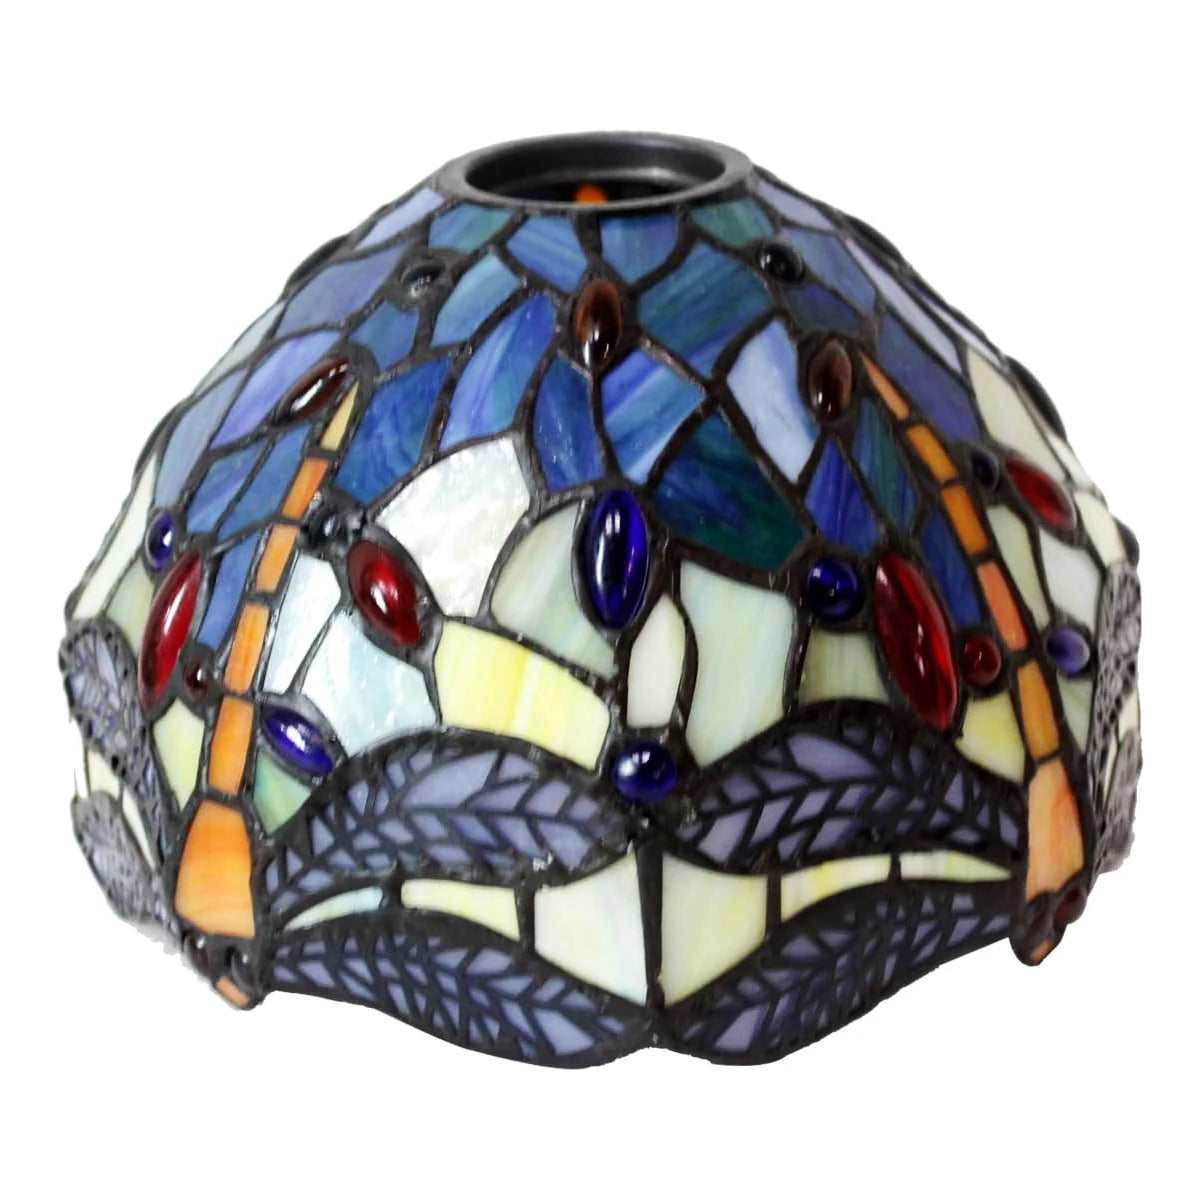 Tiffany Lamp Stained Glass Table Lamp Blue Yellow Dragonfly